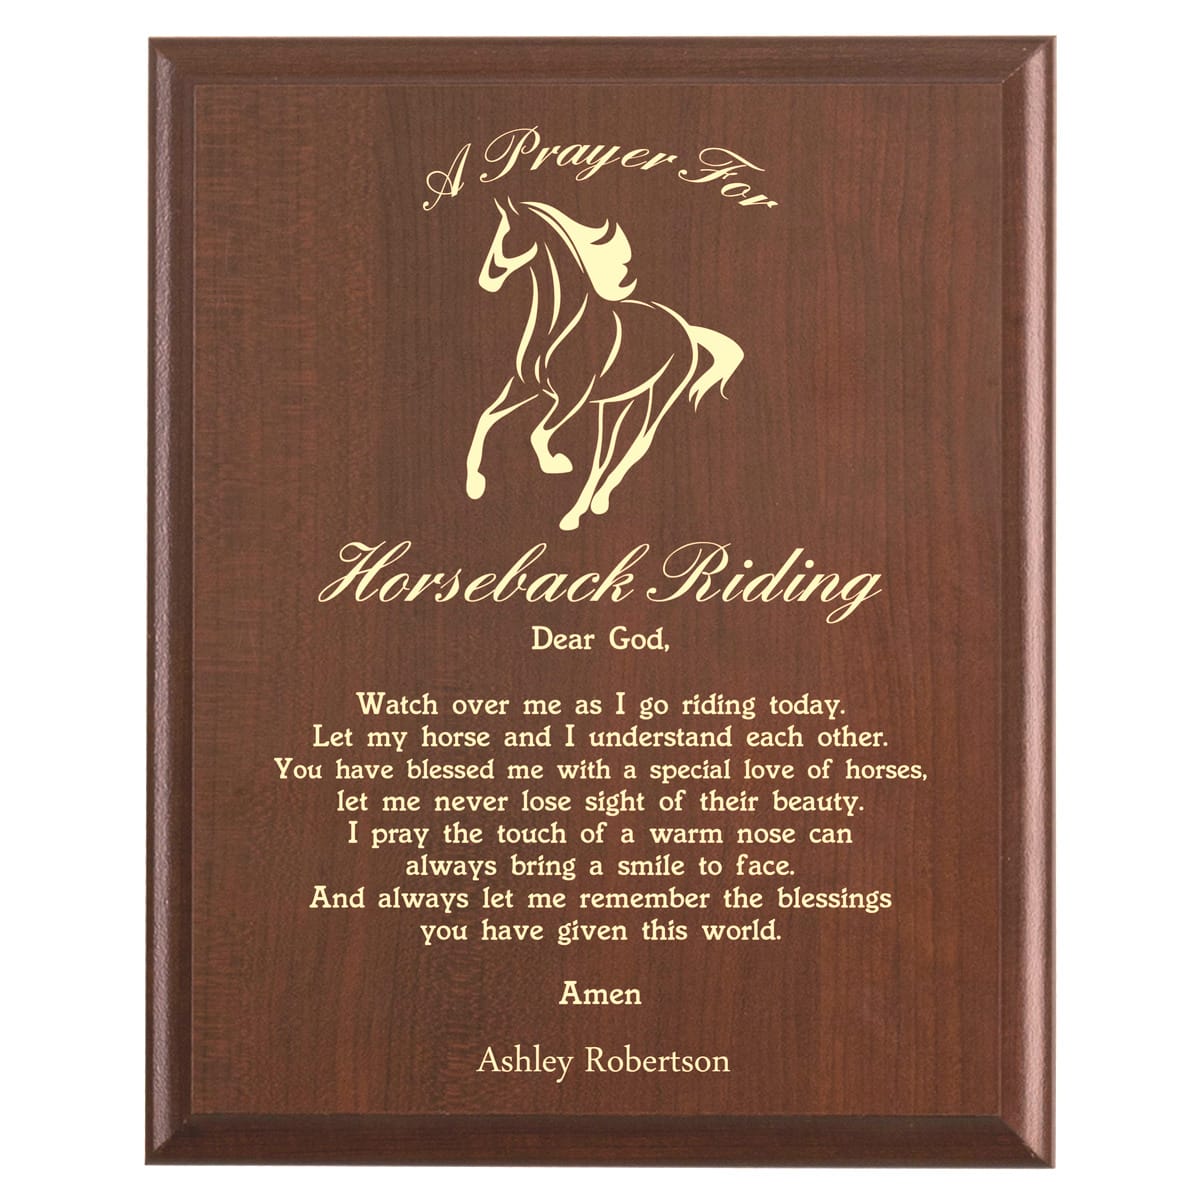 Plaque photo: Horseback Riding Prayer Plaque design with free personalization. Wood style finish with customized text.